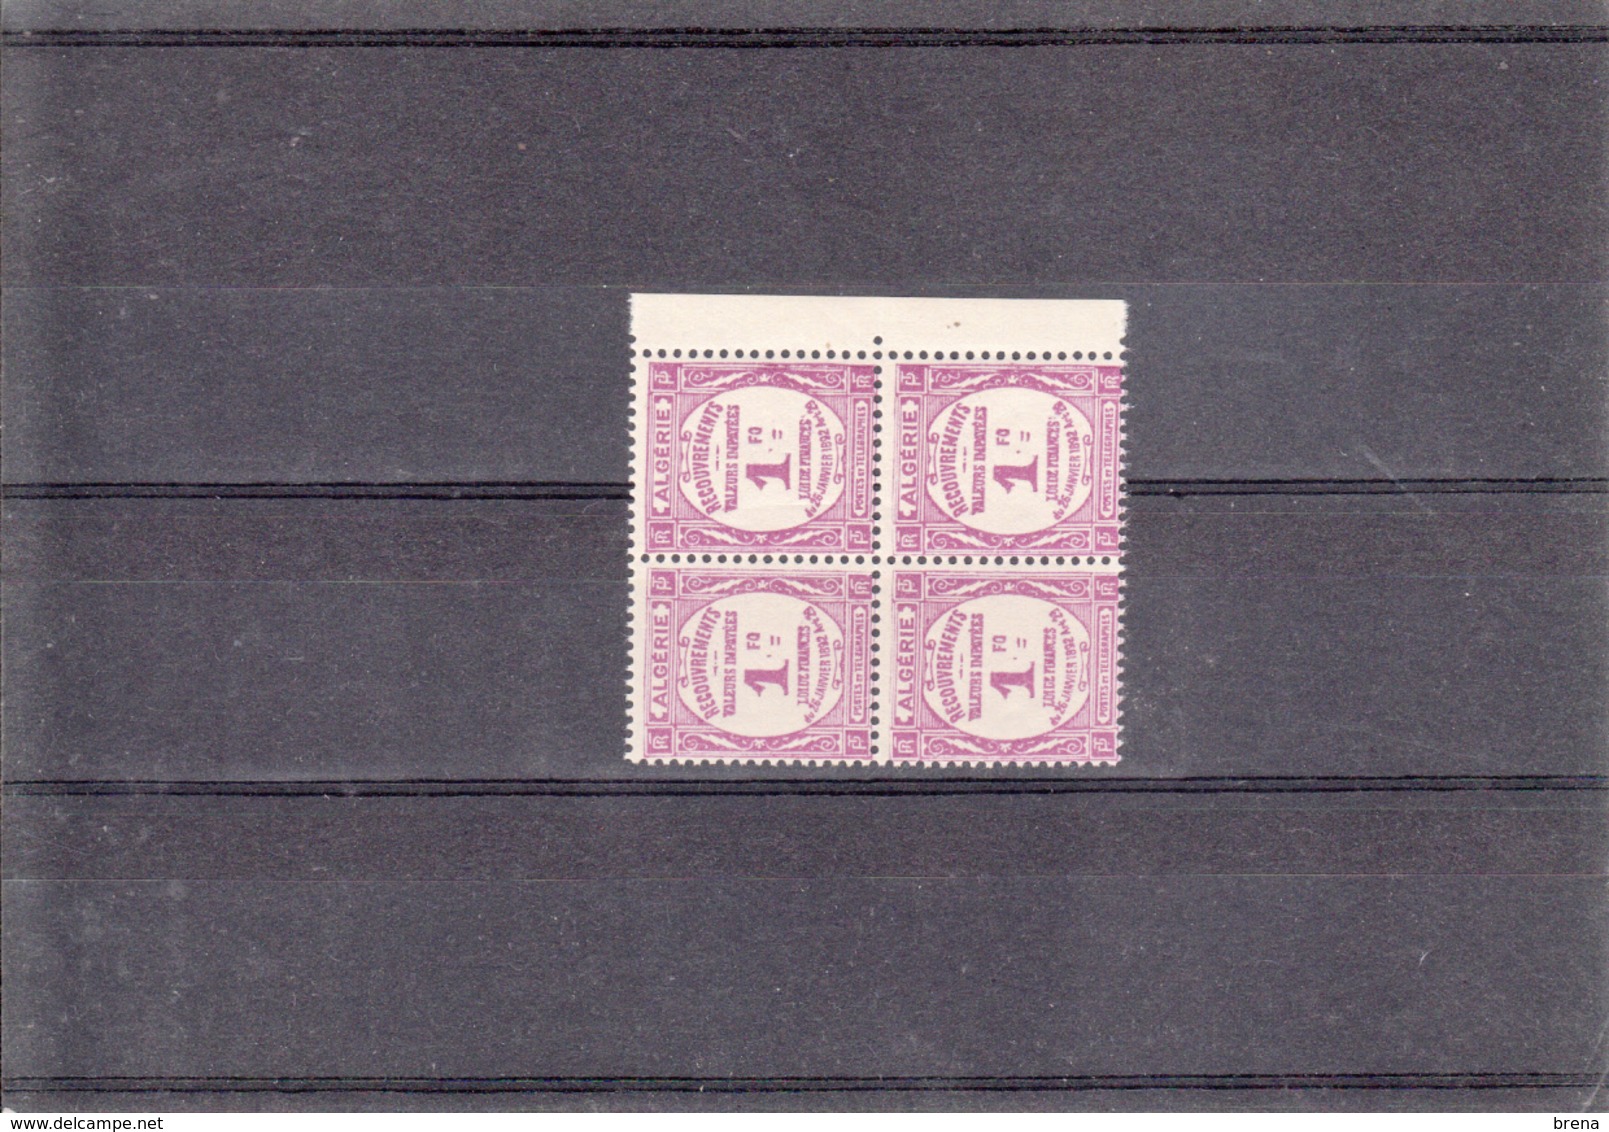 ALGERIE TIMBRES TAXES N° 19  1F LILAS  BLOC DE 4   NEUFS XX - Strafport